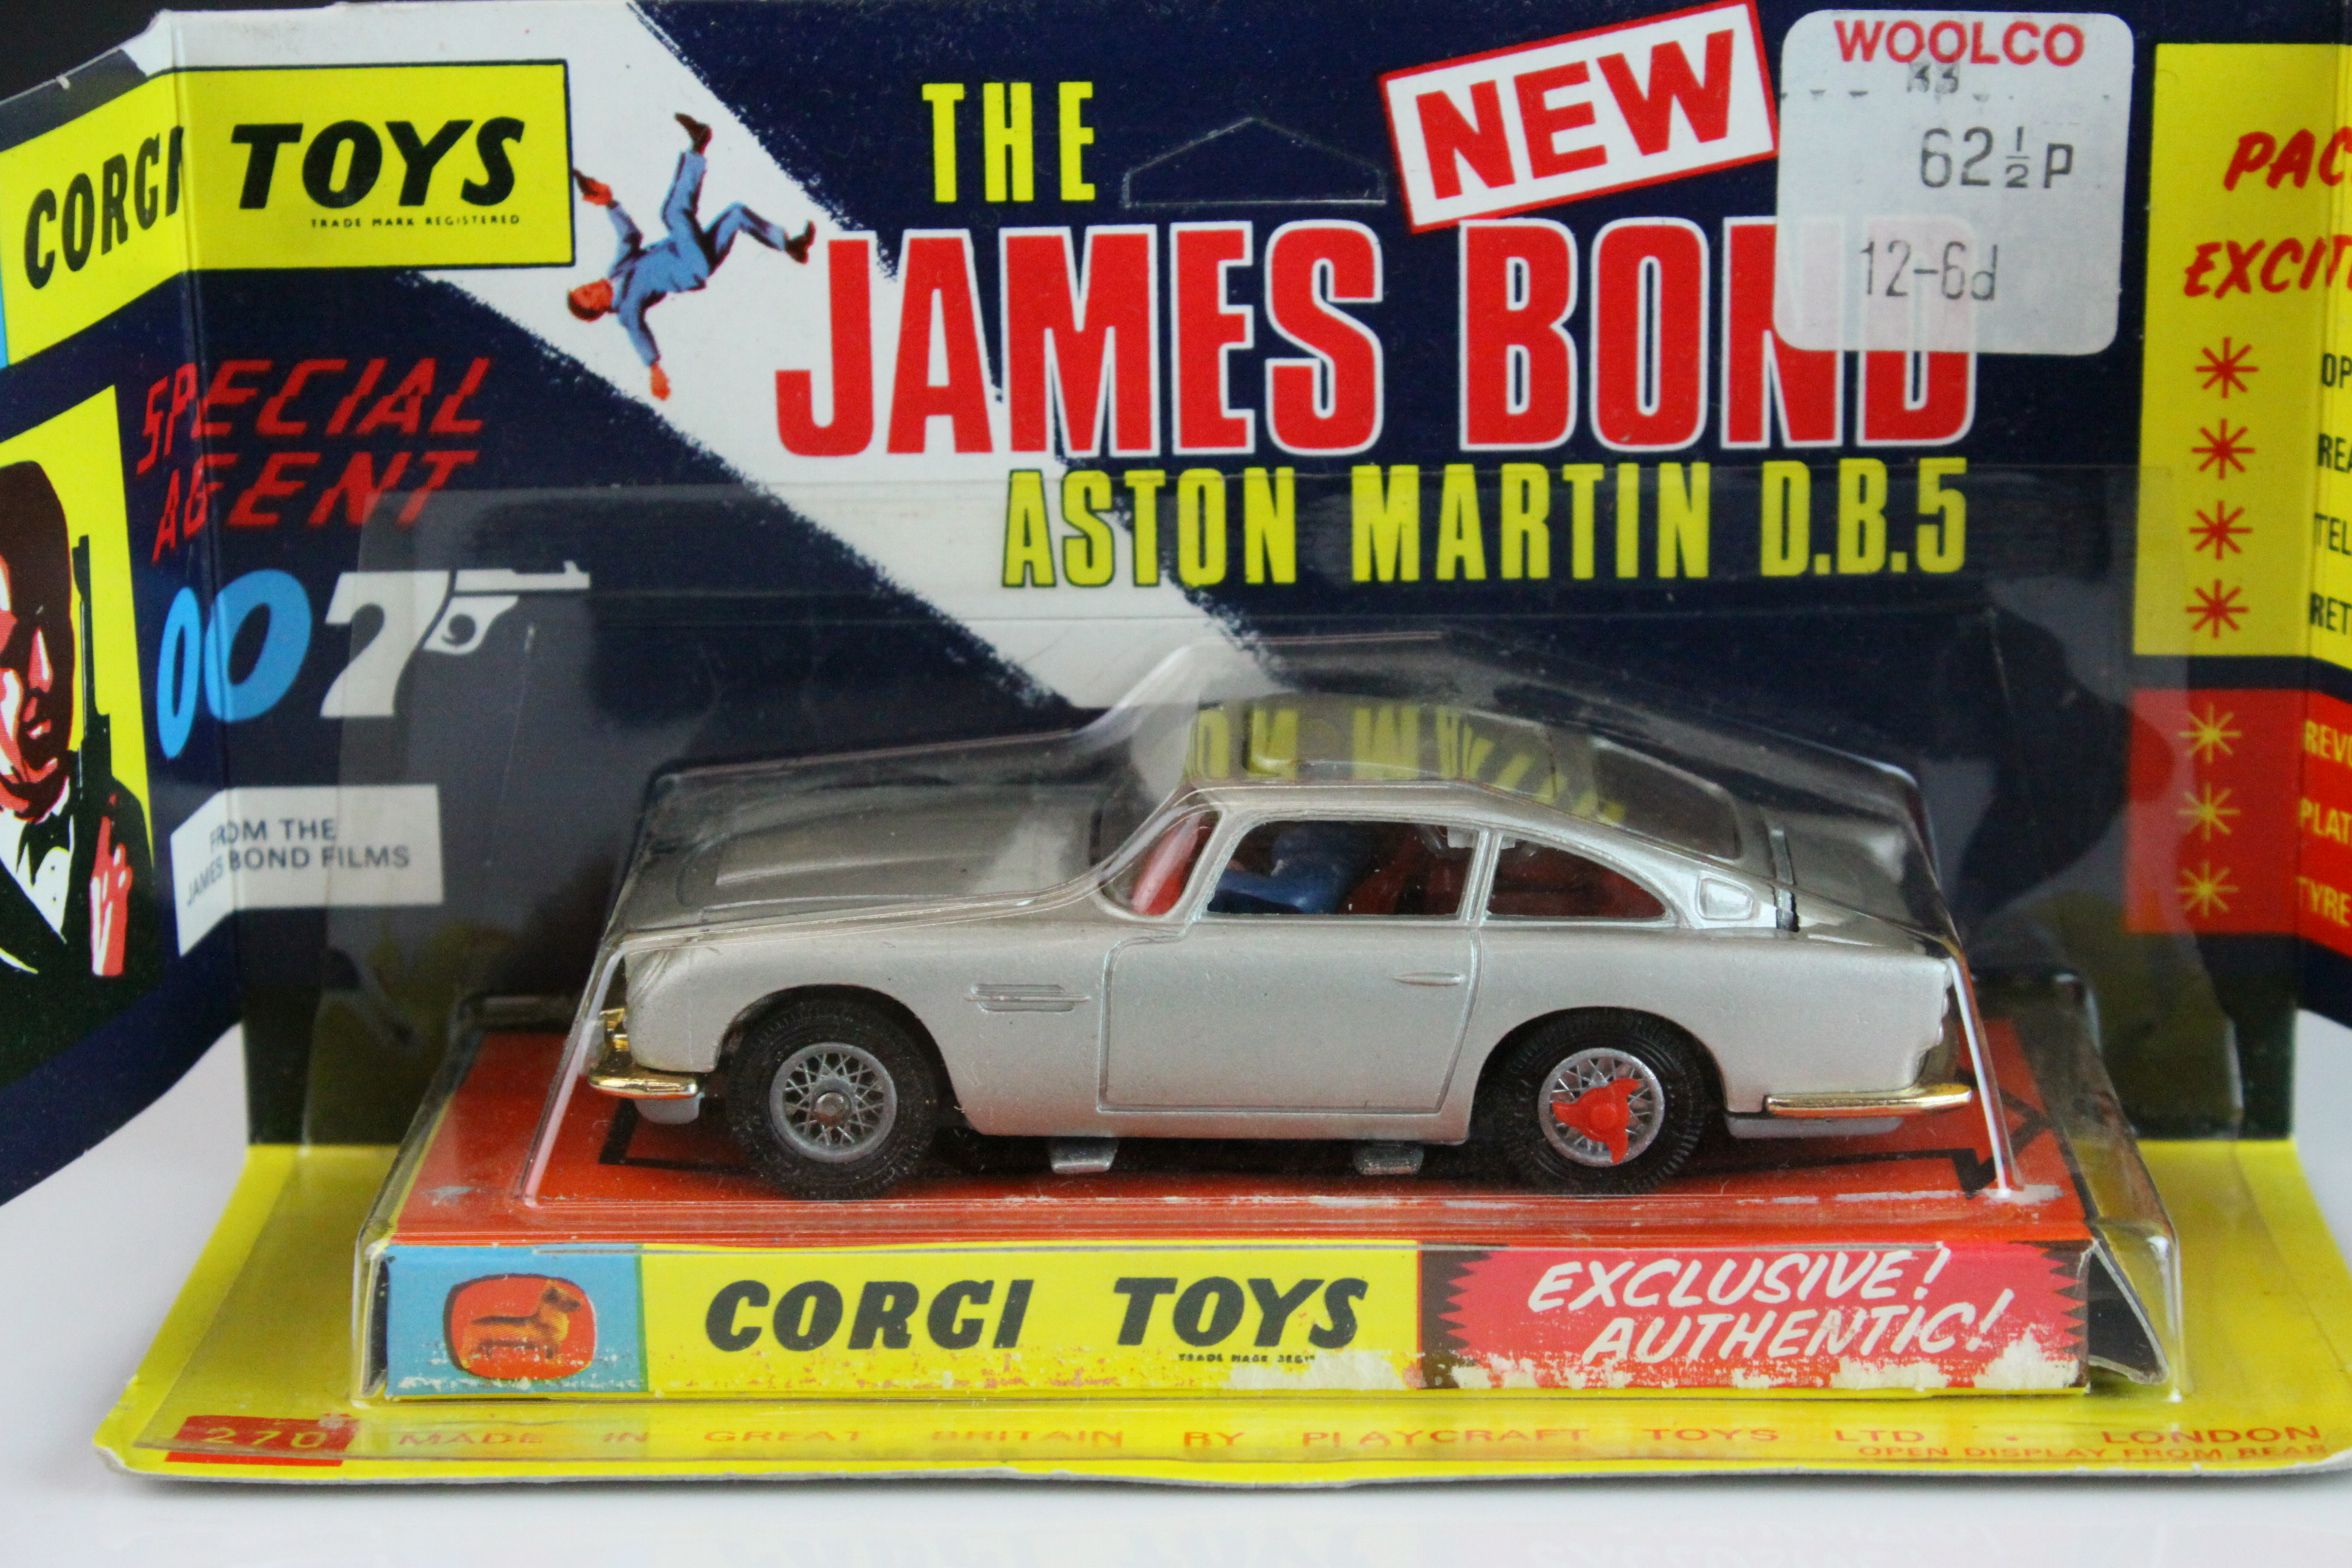 Boxed Corgi 270 The James Bond 007 Aston Martin diecast model appearing to be complete and unremoved - Image 2 of 9